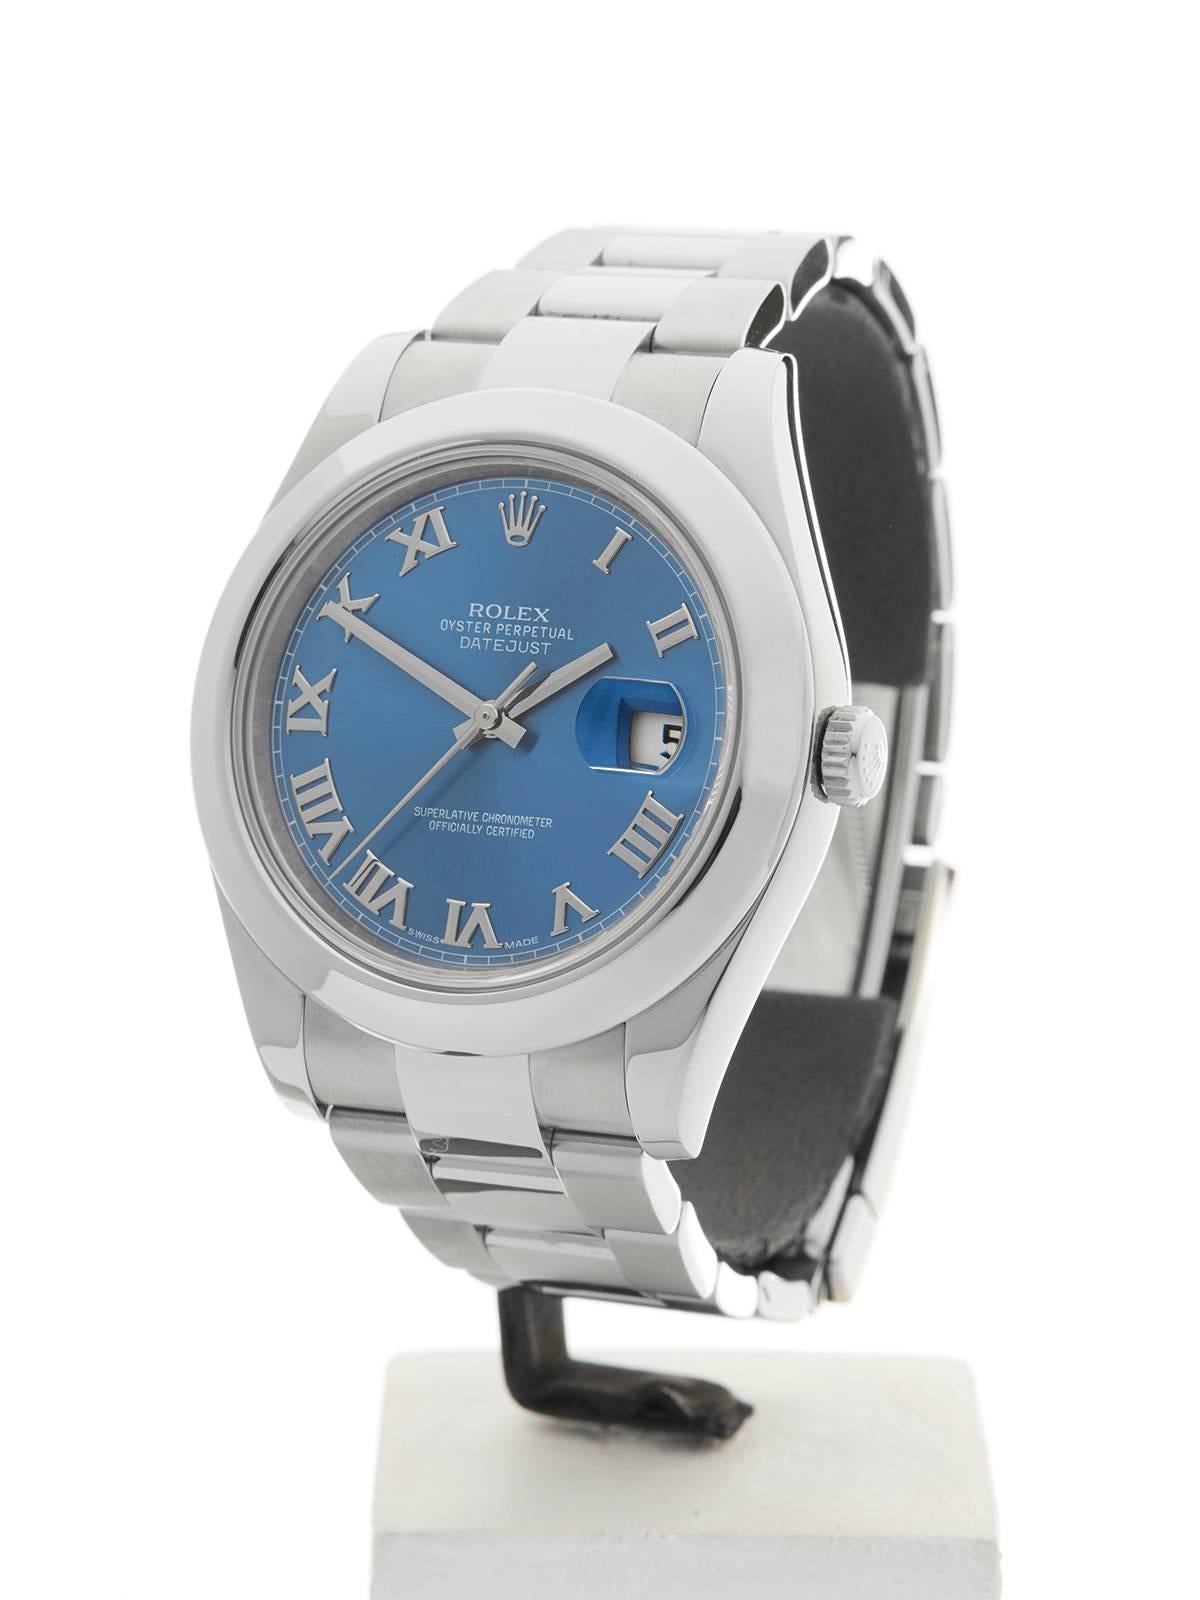 Ref:	W3721
Model: 116300
Serial: H95*****
Condition: 9 - Excellent condition
Age:	13th October 2013
Case Diameter: 41 mm
Case Size: 41mm
Box and Papers: Box, Manuals and Guarantee
Movement: Automatic
Case: Stainless Steel
Dial: Blue Roman
Bracelet: